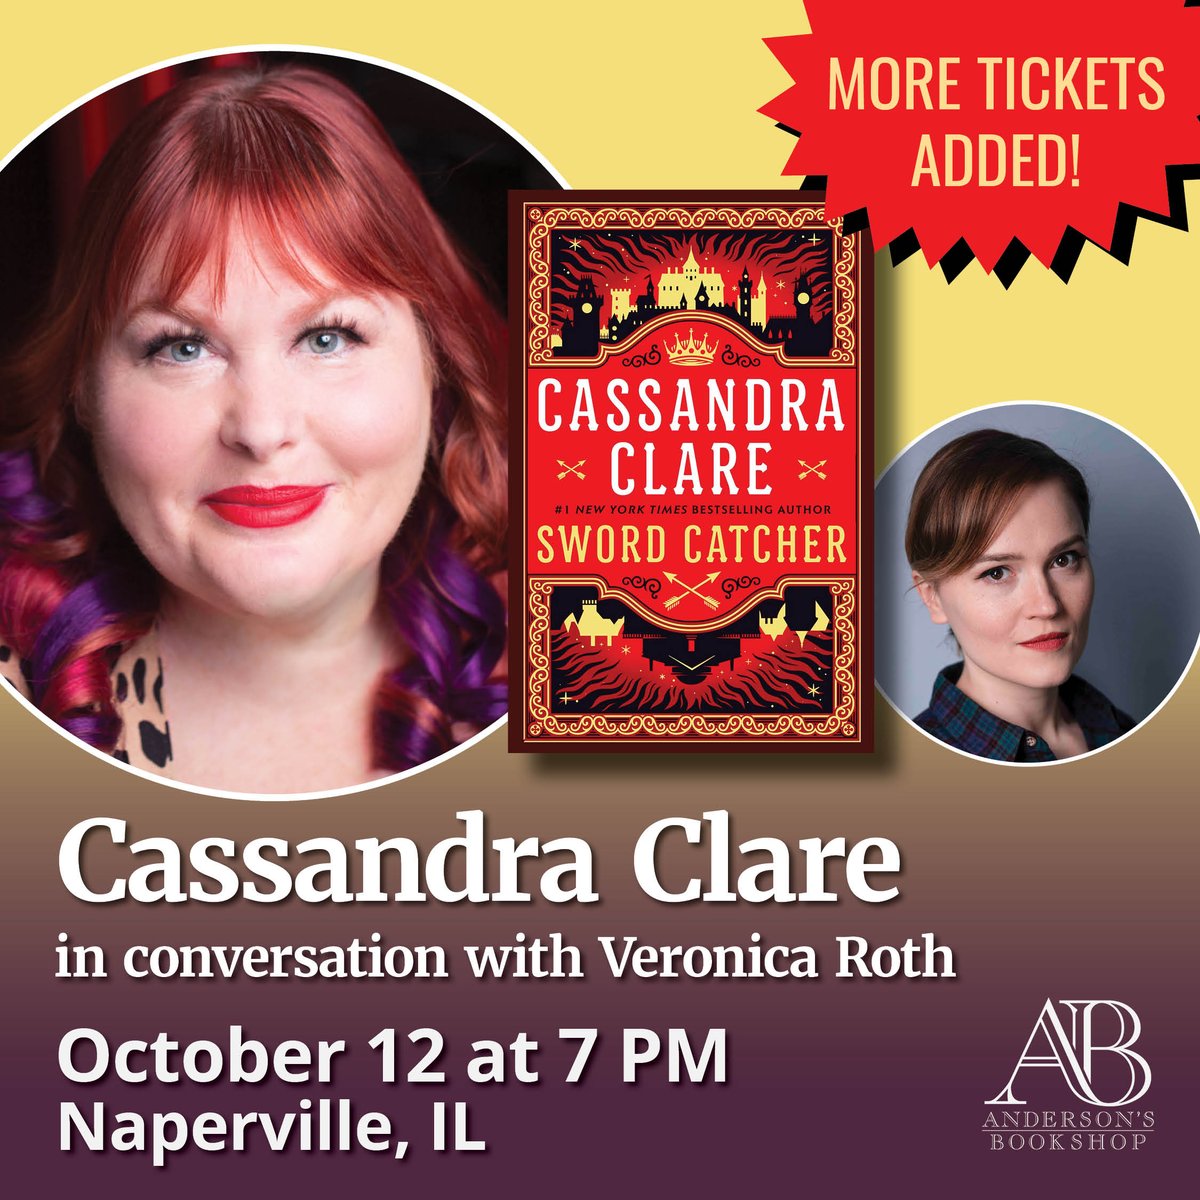 ABOUT 20 TICKETS LEFT! Two AMAZING authors together at one event when Cassandra Clare @cassieclare brings us her debut adult fantasy novel Sword Catcher while in conversation with Veronica Roth! Includes Q&A and photo/signing line! Details and tickets: SwordCatcherAndersons.eventcombo.com